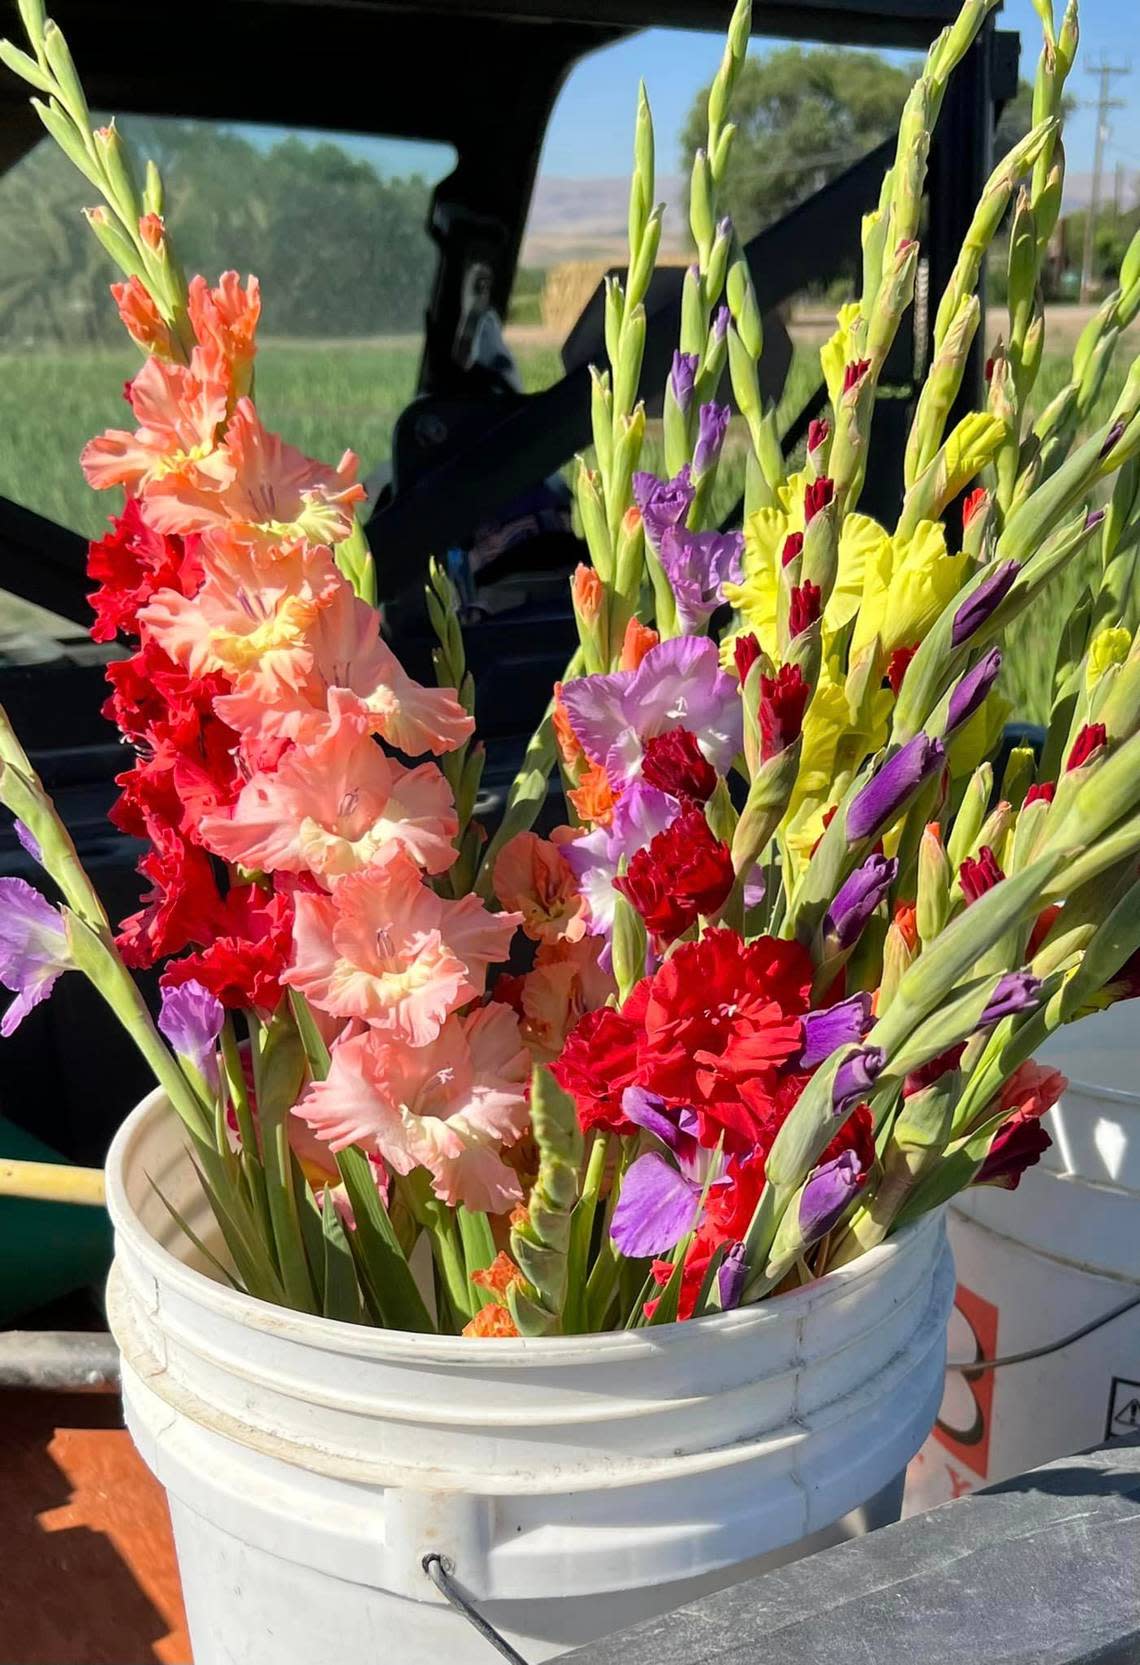 Mark and Cindy McClaskey have been selling gladiolas at the Capital City Public Market since it opened in downtown Boise in 1994.